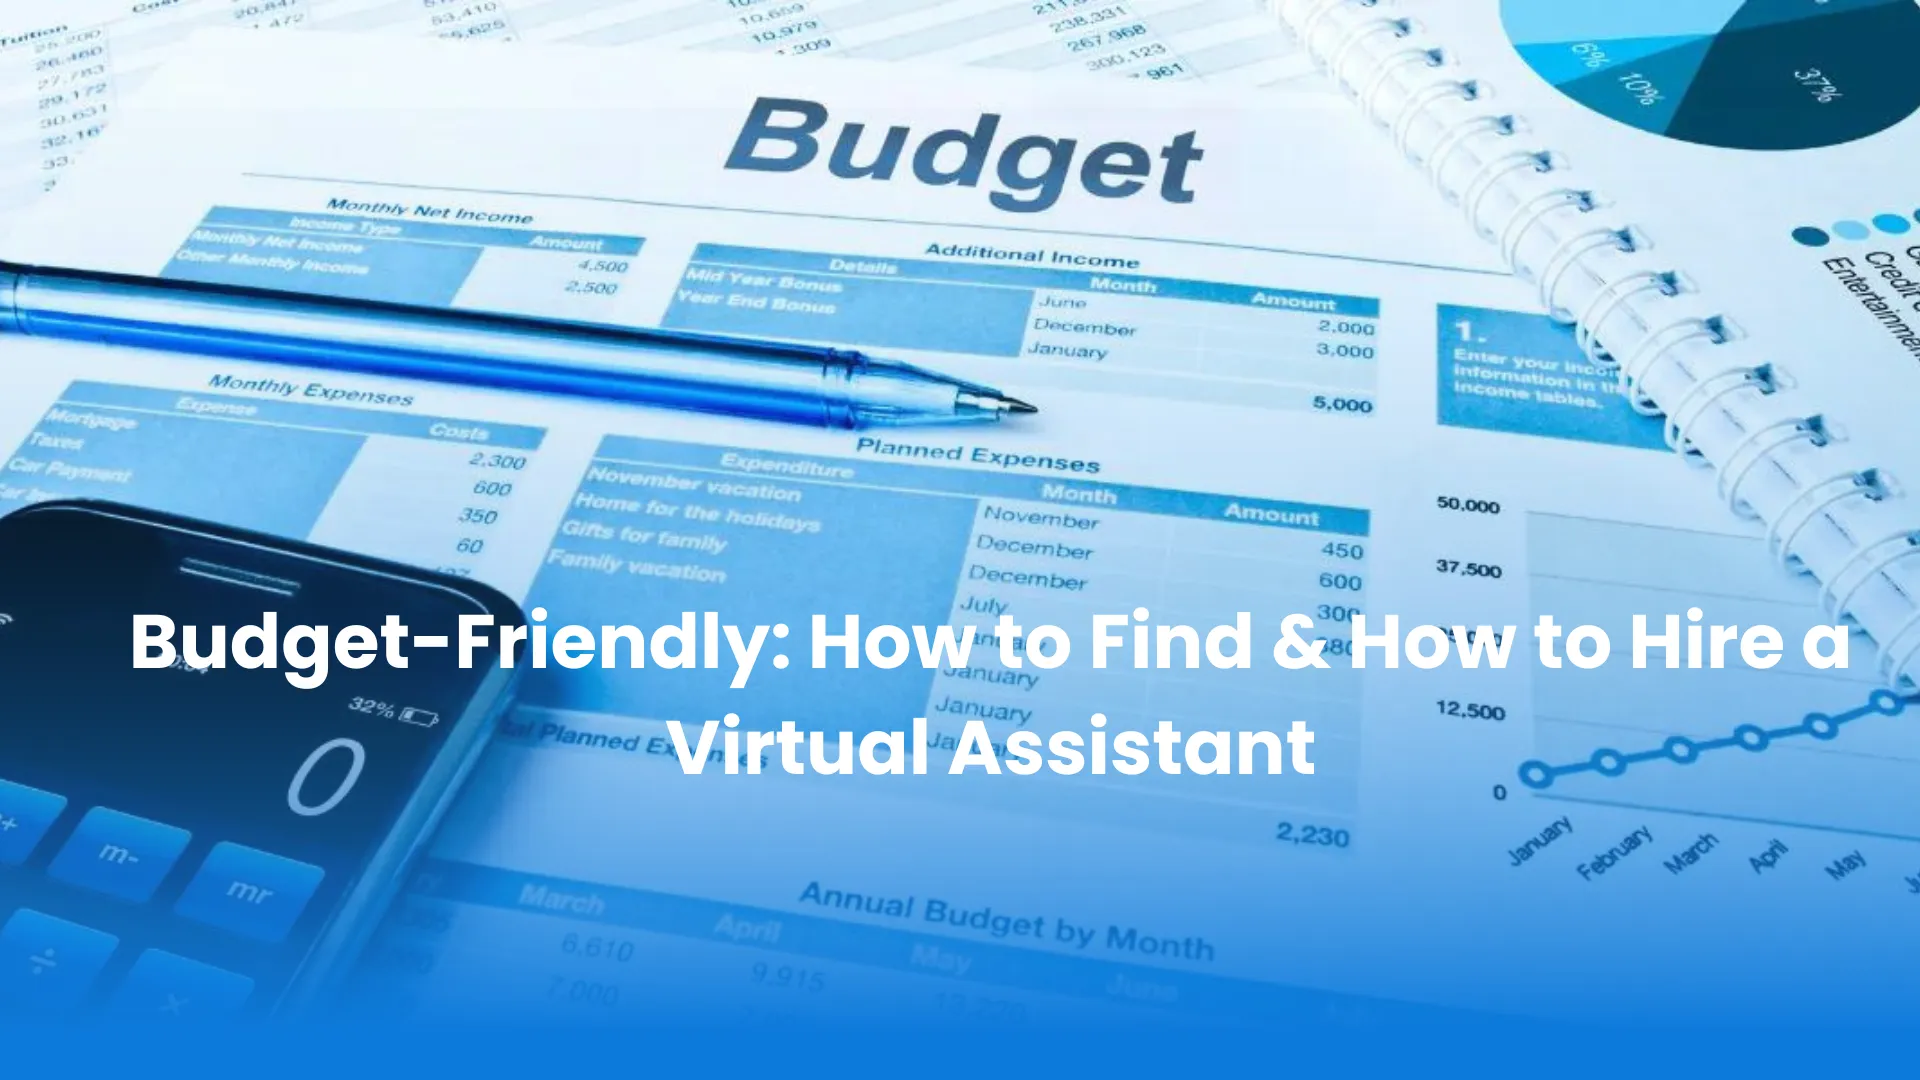 Budget-Friendly: How to Find & How to Hire a Virtual Assistant